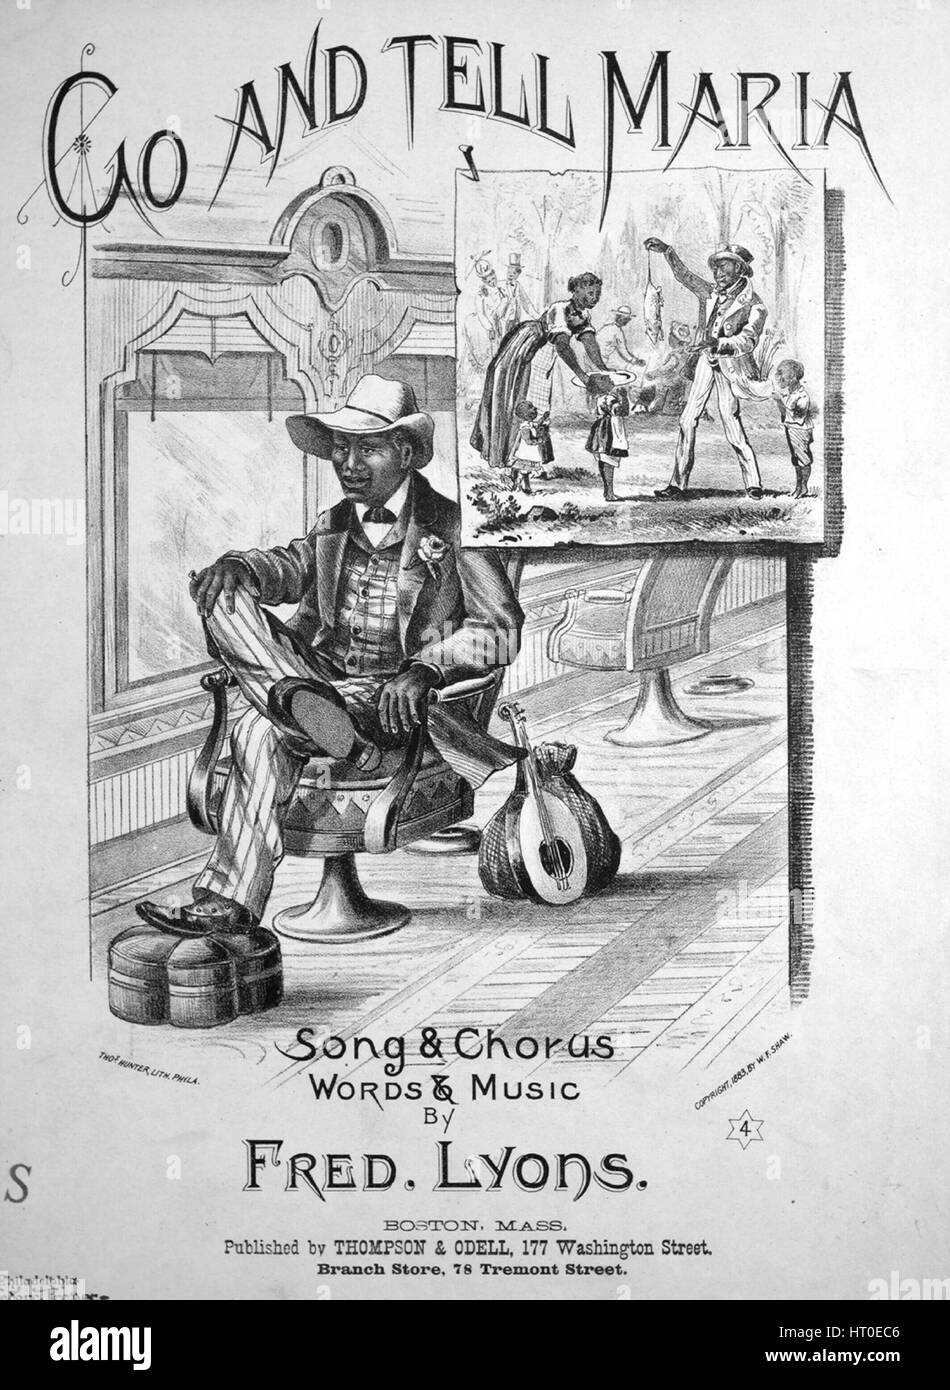 Sheet music cover image of the song 'Go And Tell Maria Song and Chorus', with original authorship notes reading 'Words and Music by Fred Lyons', United States, 1883. The publisher is listed as 'Thompson and Odell, 177 Washington Street, Branch Store, 78 Tremont St.', the form of composition is 'strophic with chorus', the instrumentation is 'piano and voice', the first line reads 'De winds don't blow nor de rain don't fall, Go and tell Maria', and the illustration artist is listed as 'Thos. Hunter, Lith. Phila.; Wm. H. Keyser and Co., Music Typographers, 921 Arch St., Philada.'. Stock Photo